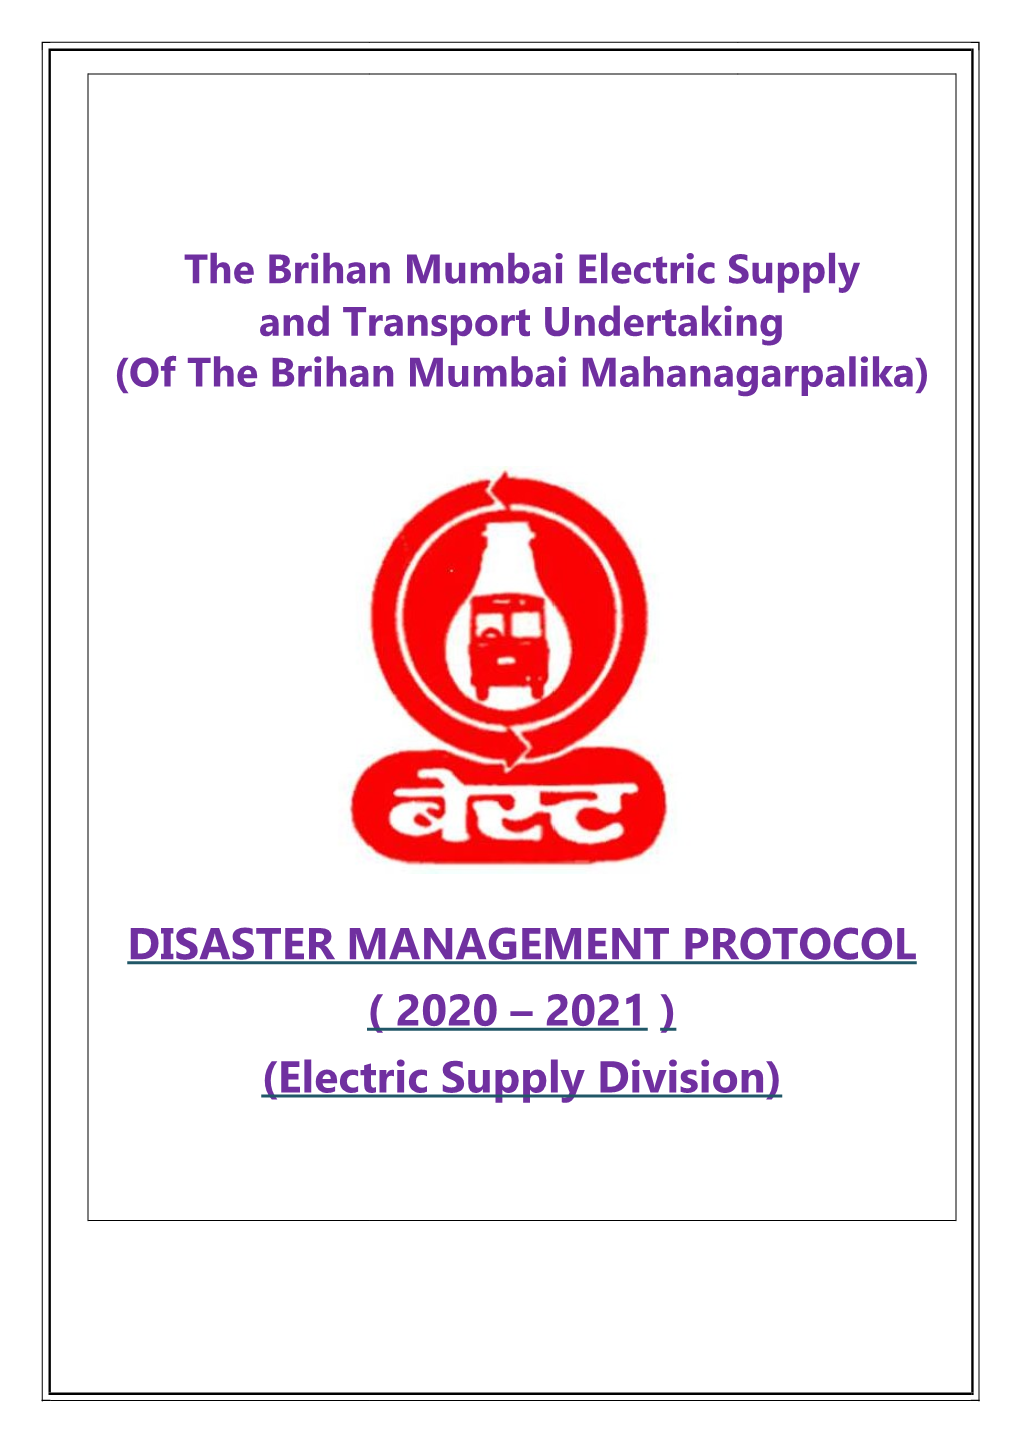 DISASTER MANAGEMENT PROTOCOL ( 2020 – 2021 ) (Electric Supply Division)